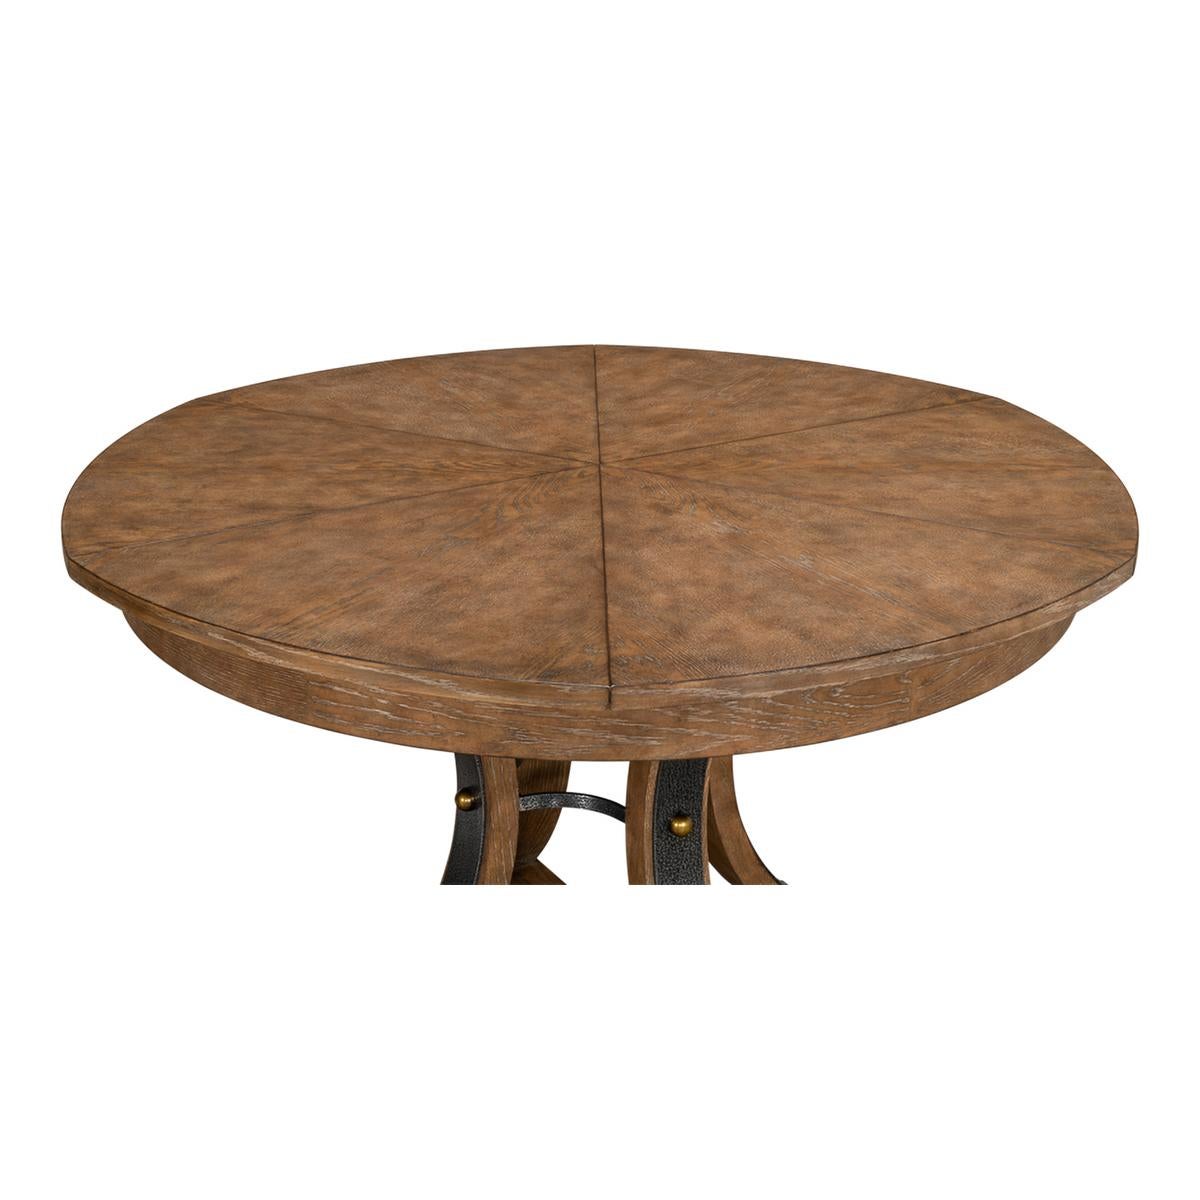 Iron Modern Industrial Round Dining Table - 70 - Light Mink For Sale